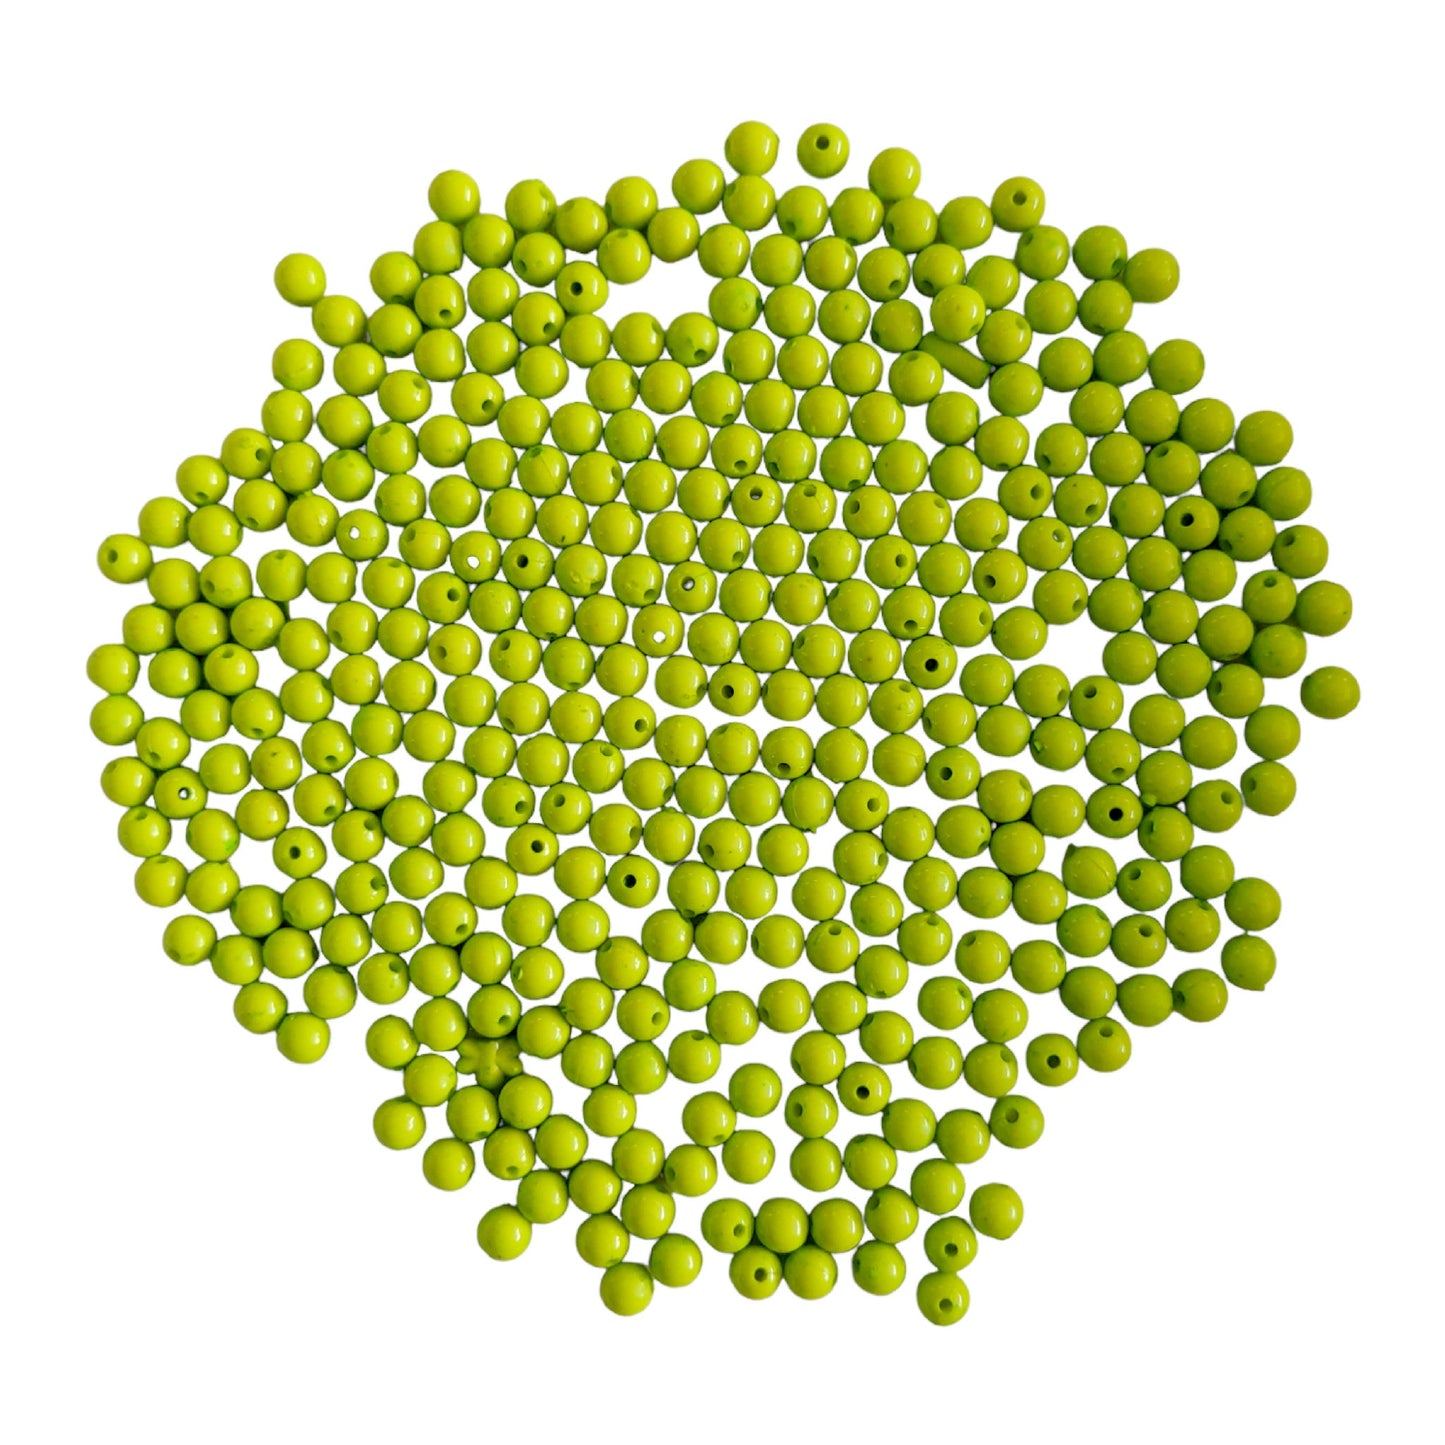 Indian Petals - Round ABS Colored Beads Ideal for Jewelry designing Craft or Decor Round ABS Colored Beads Ideal for Jewelry designing Craft or Decor - 6mm / Lawn Green / 100 Grams